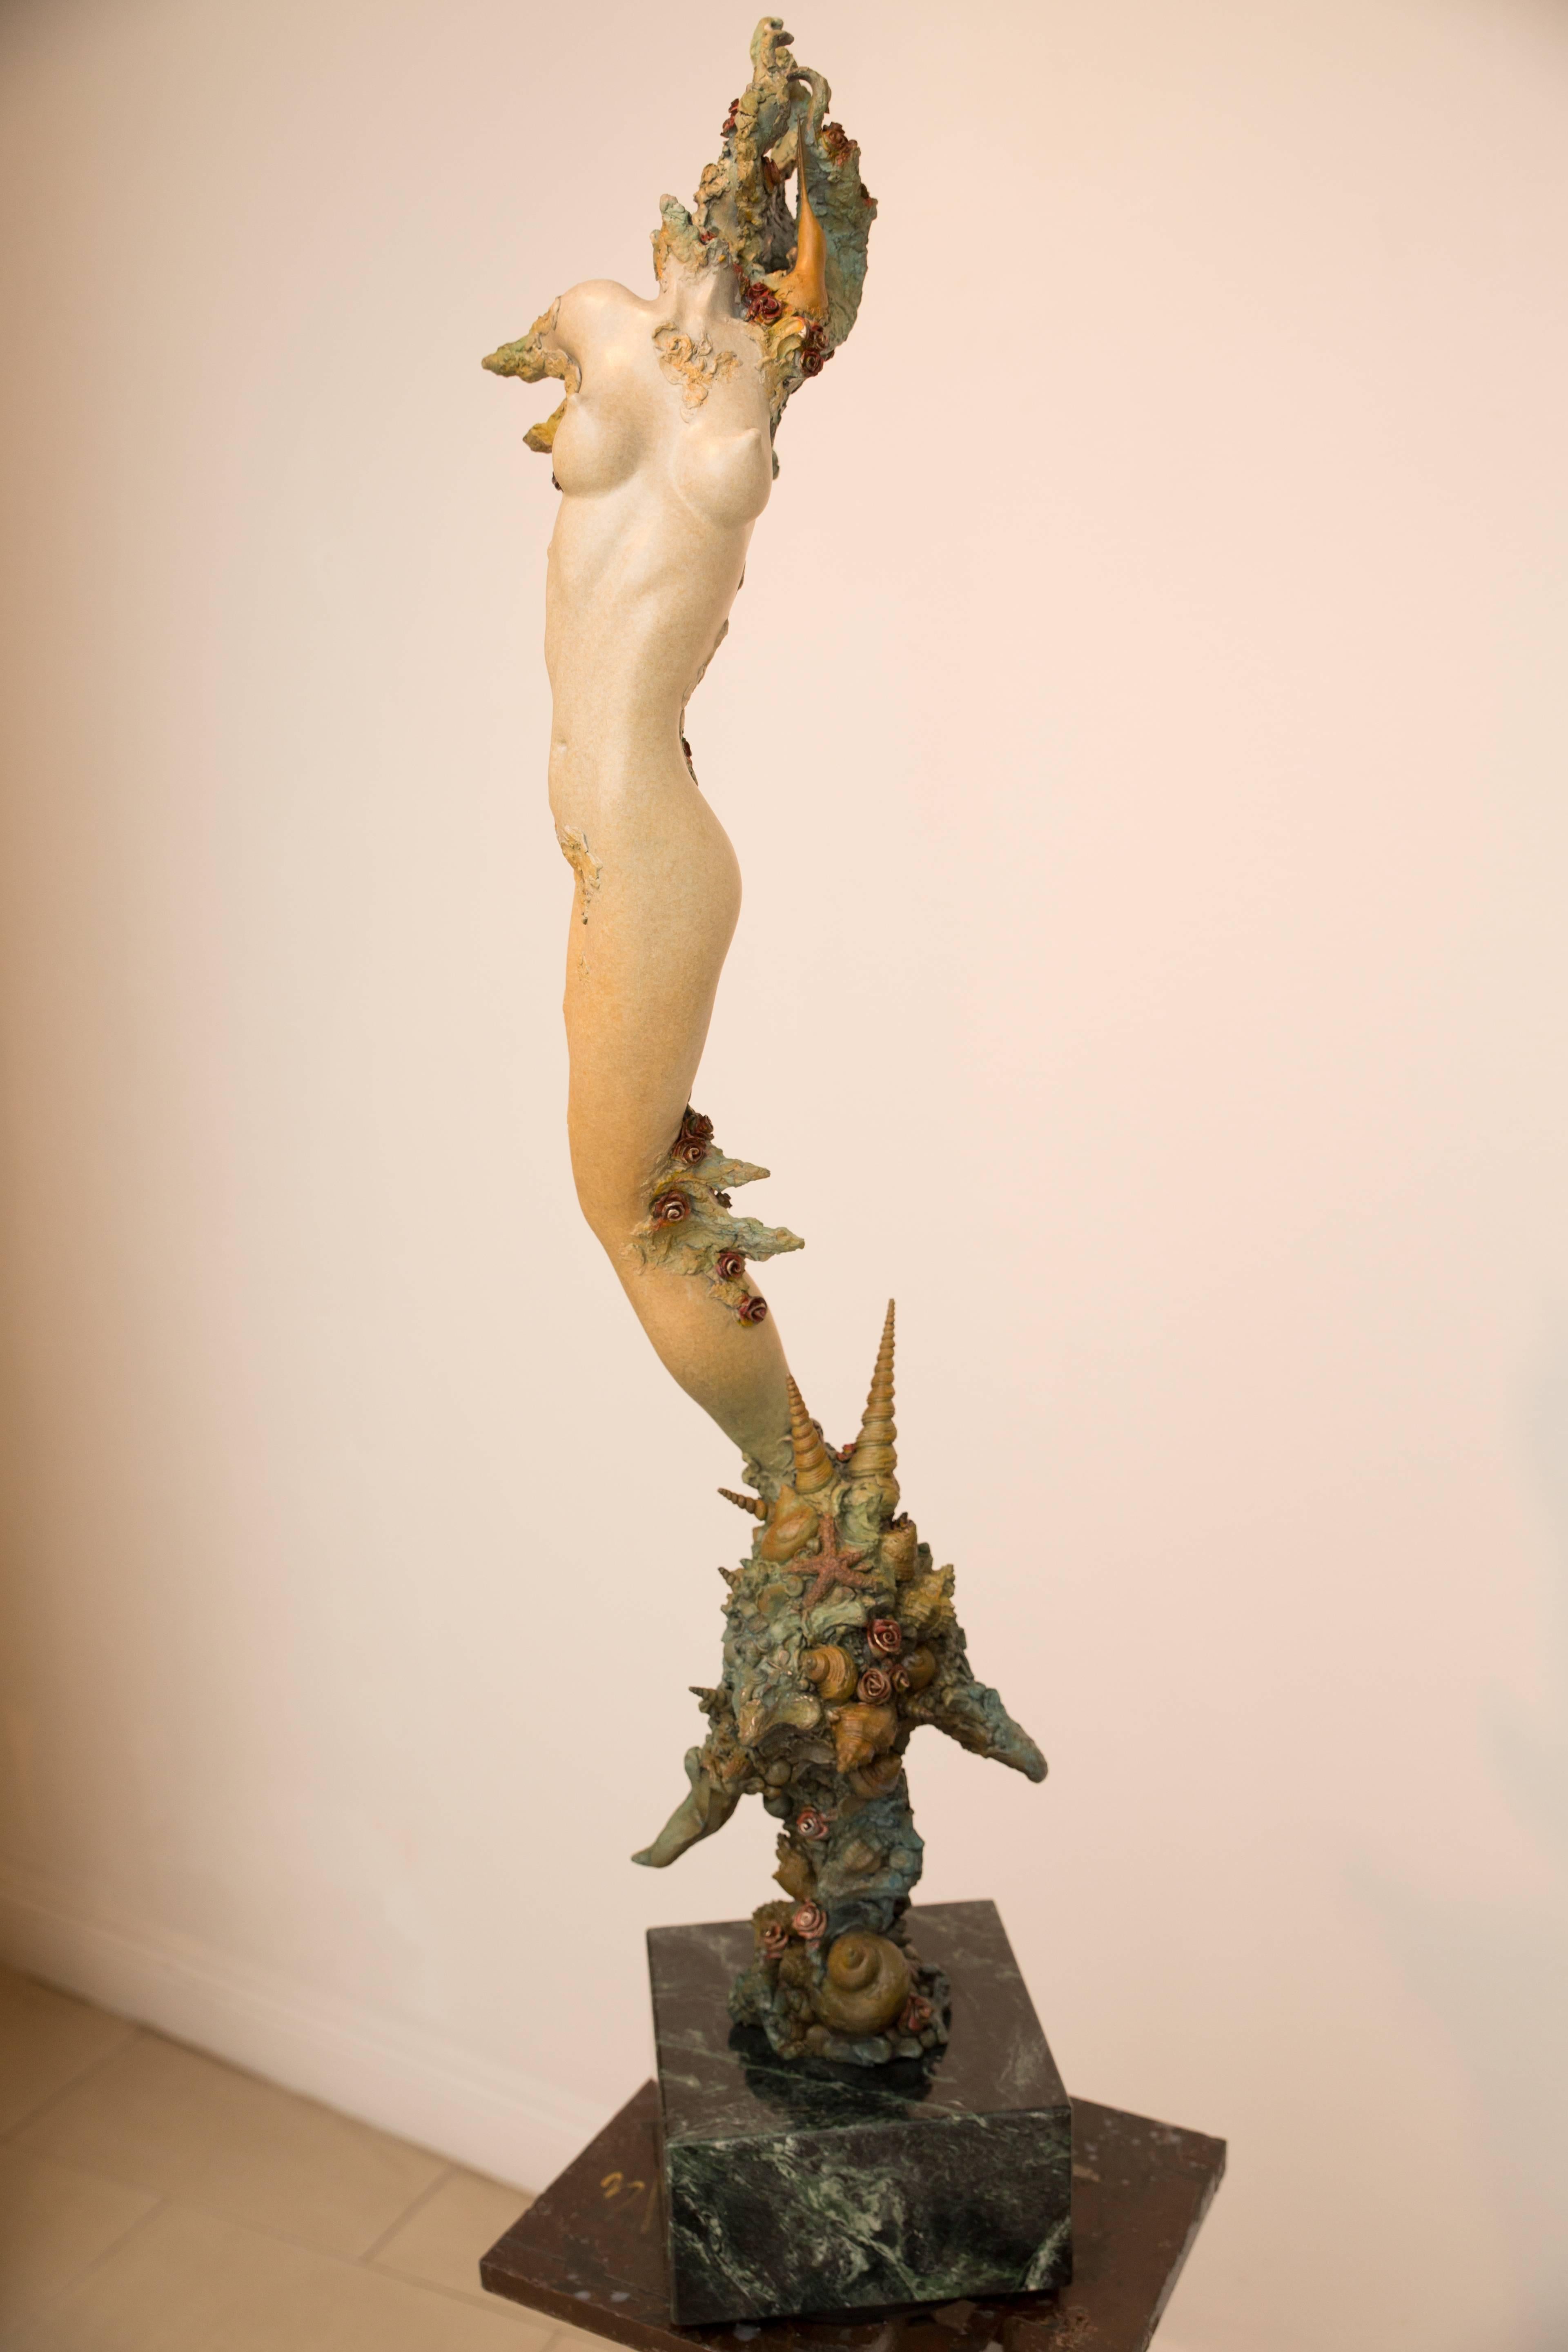 From Sea to Sky - Sculpture by Kira